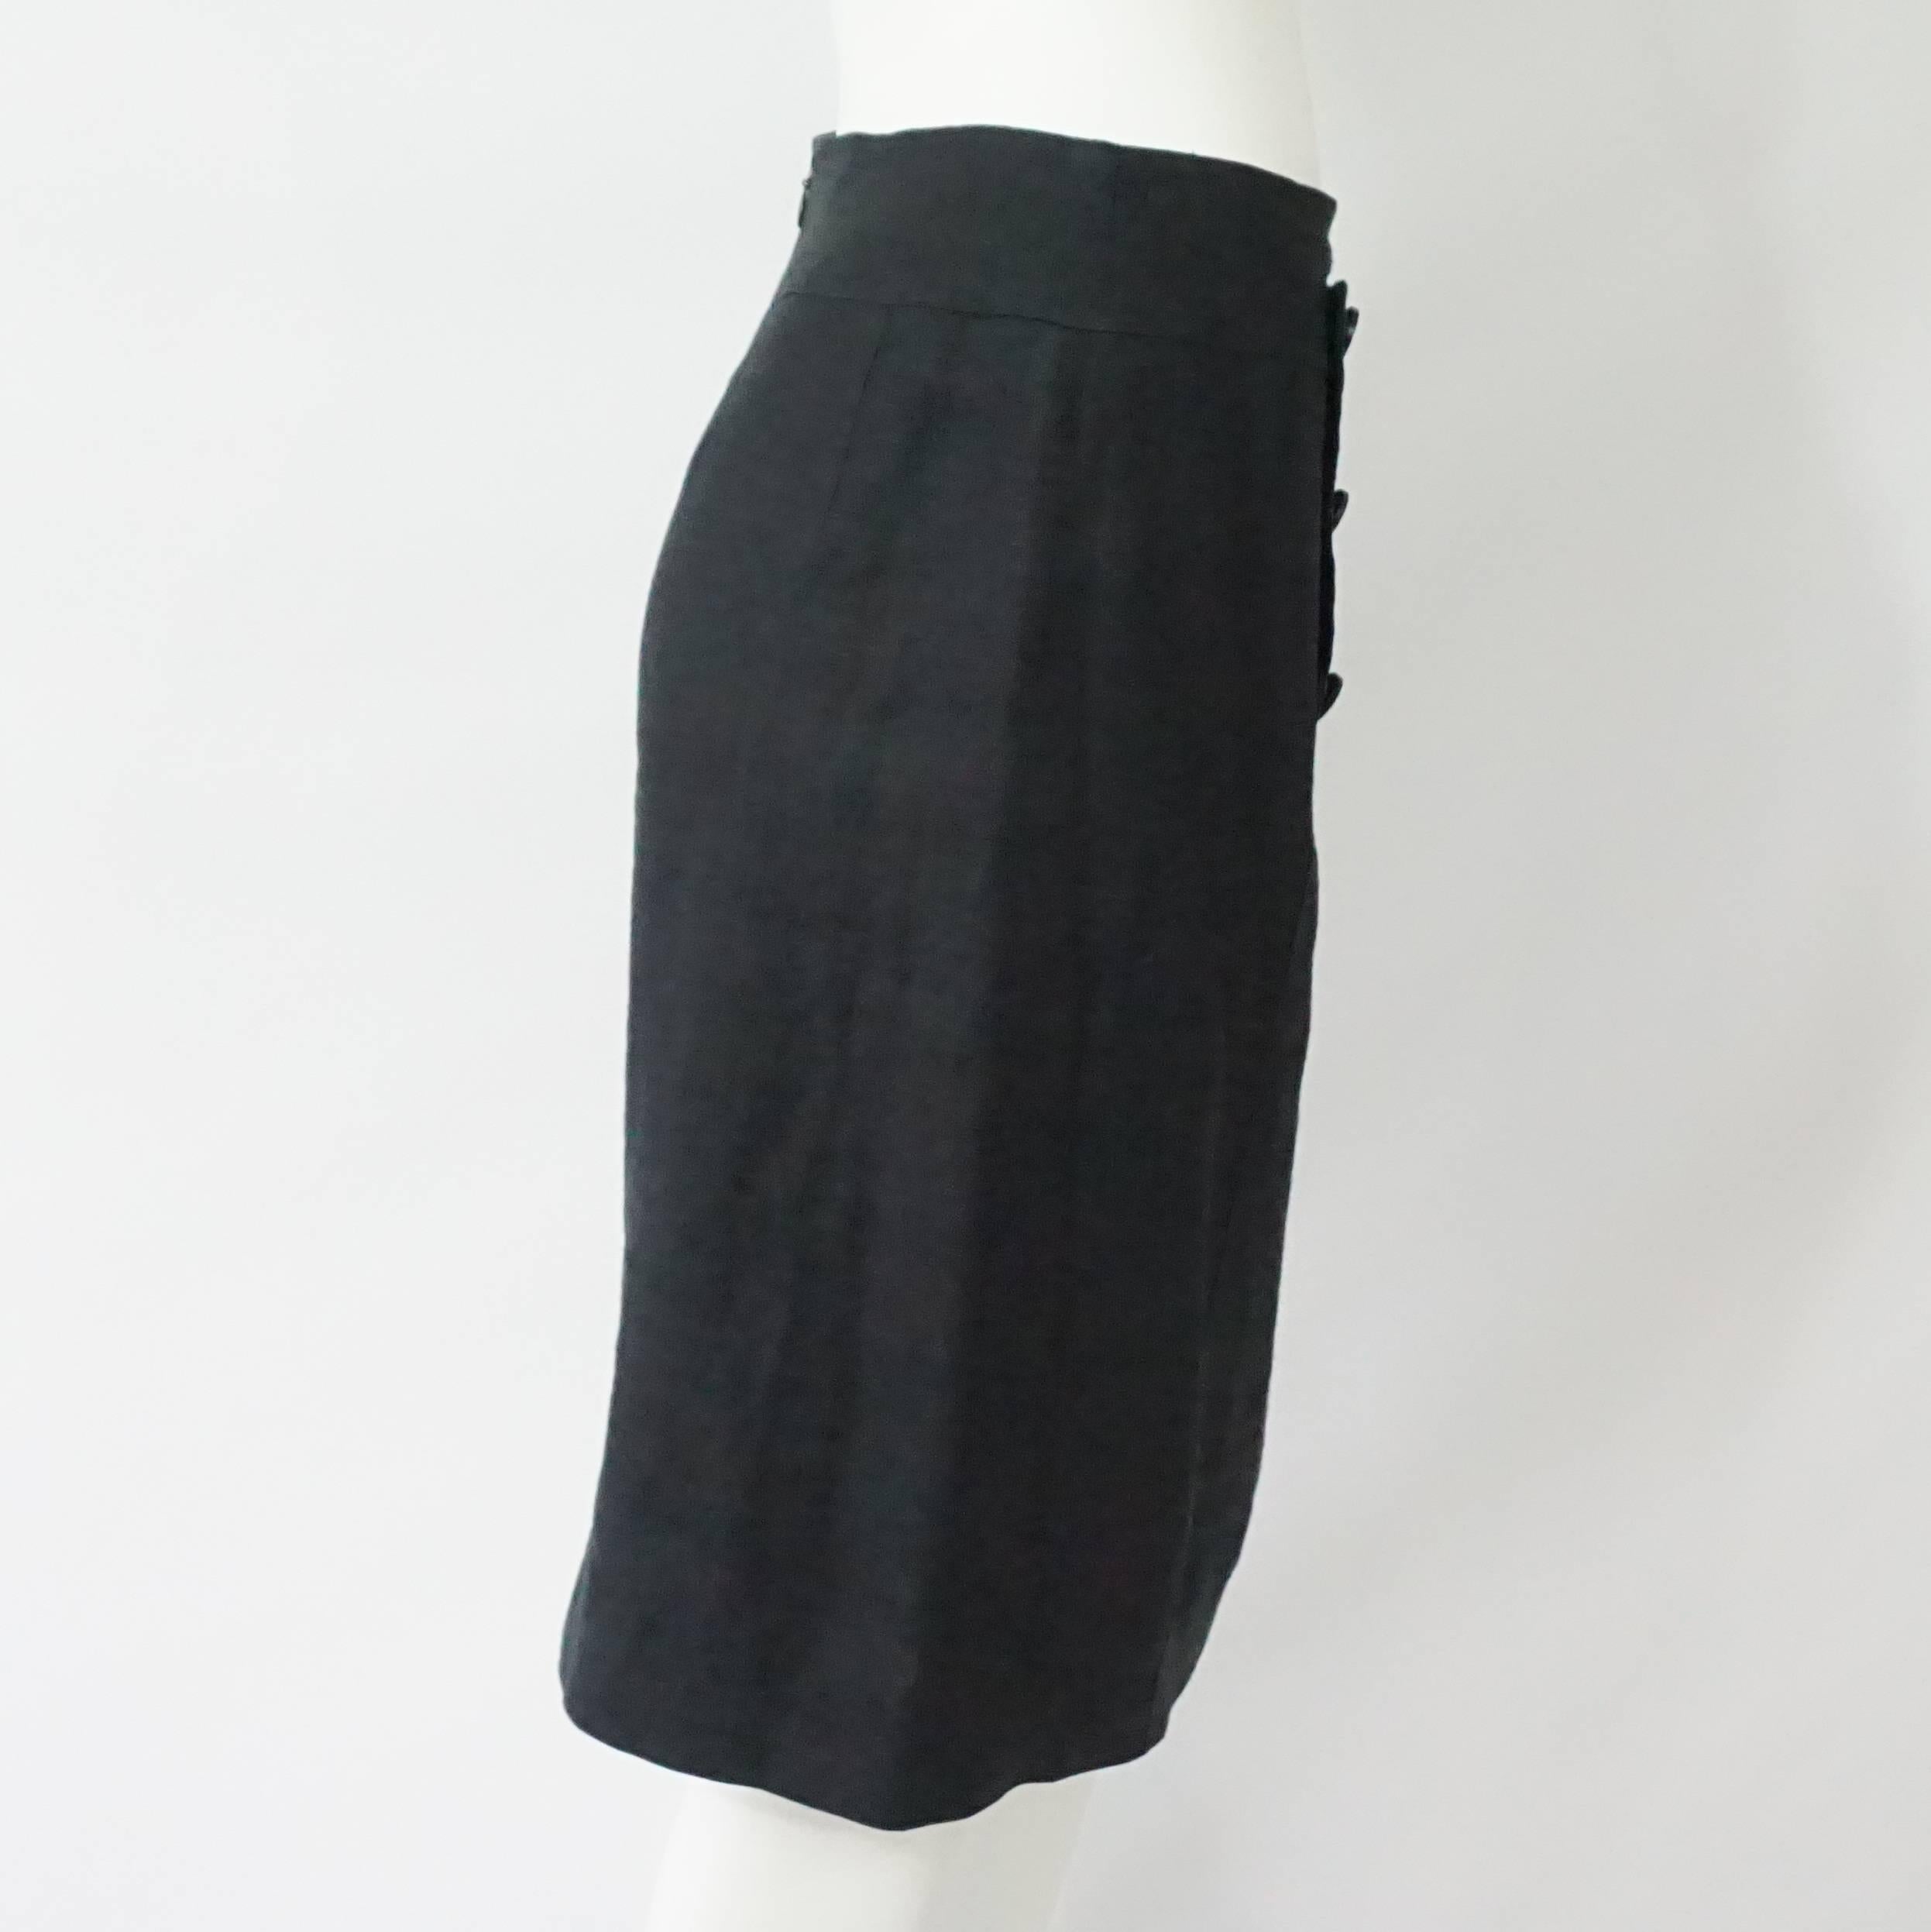 Chanel Black Linen Nautical Style Skirt - 36 - Circa 80's  This black linen skirt has 8 front Chanel logo buttons with a nautical style design, a back slit and is perfect piece for any Chanel collector. It is in excellent vintage